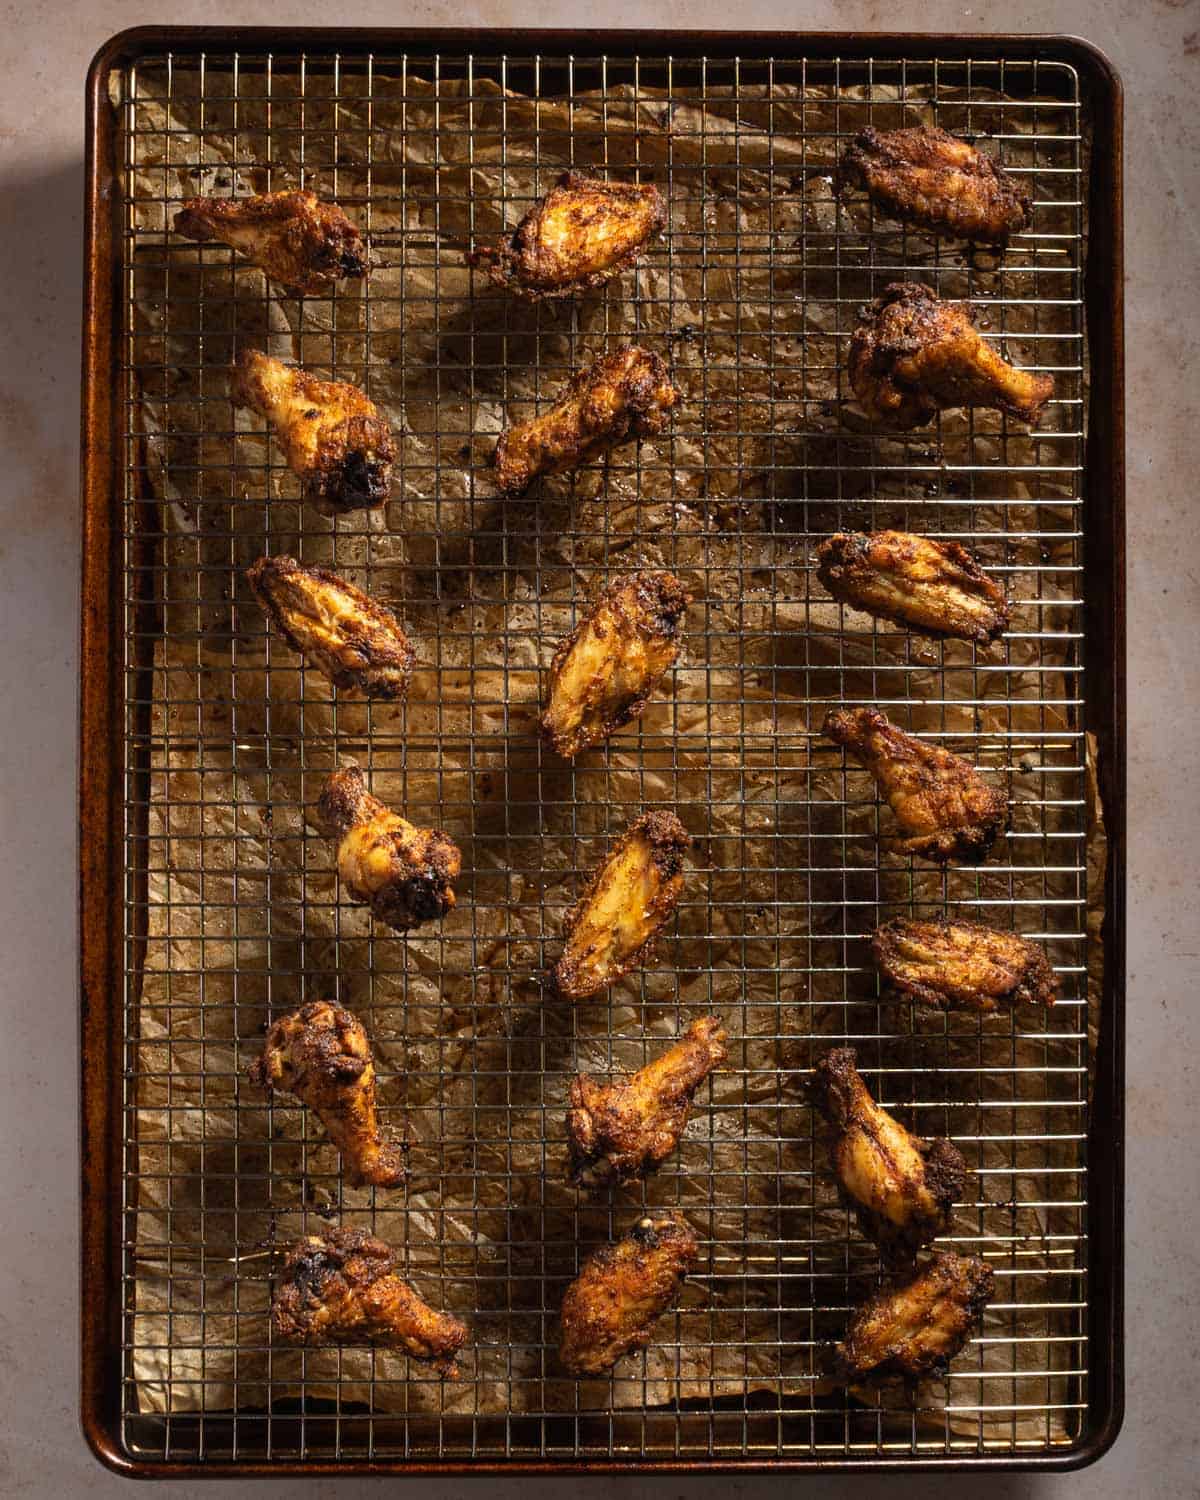 Baked chicken wings on a baking sheet and wire rack.